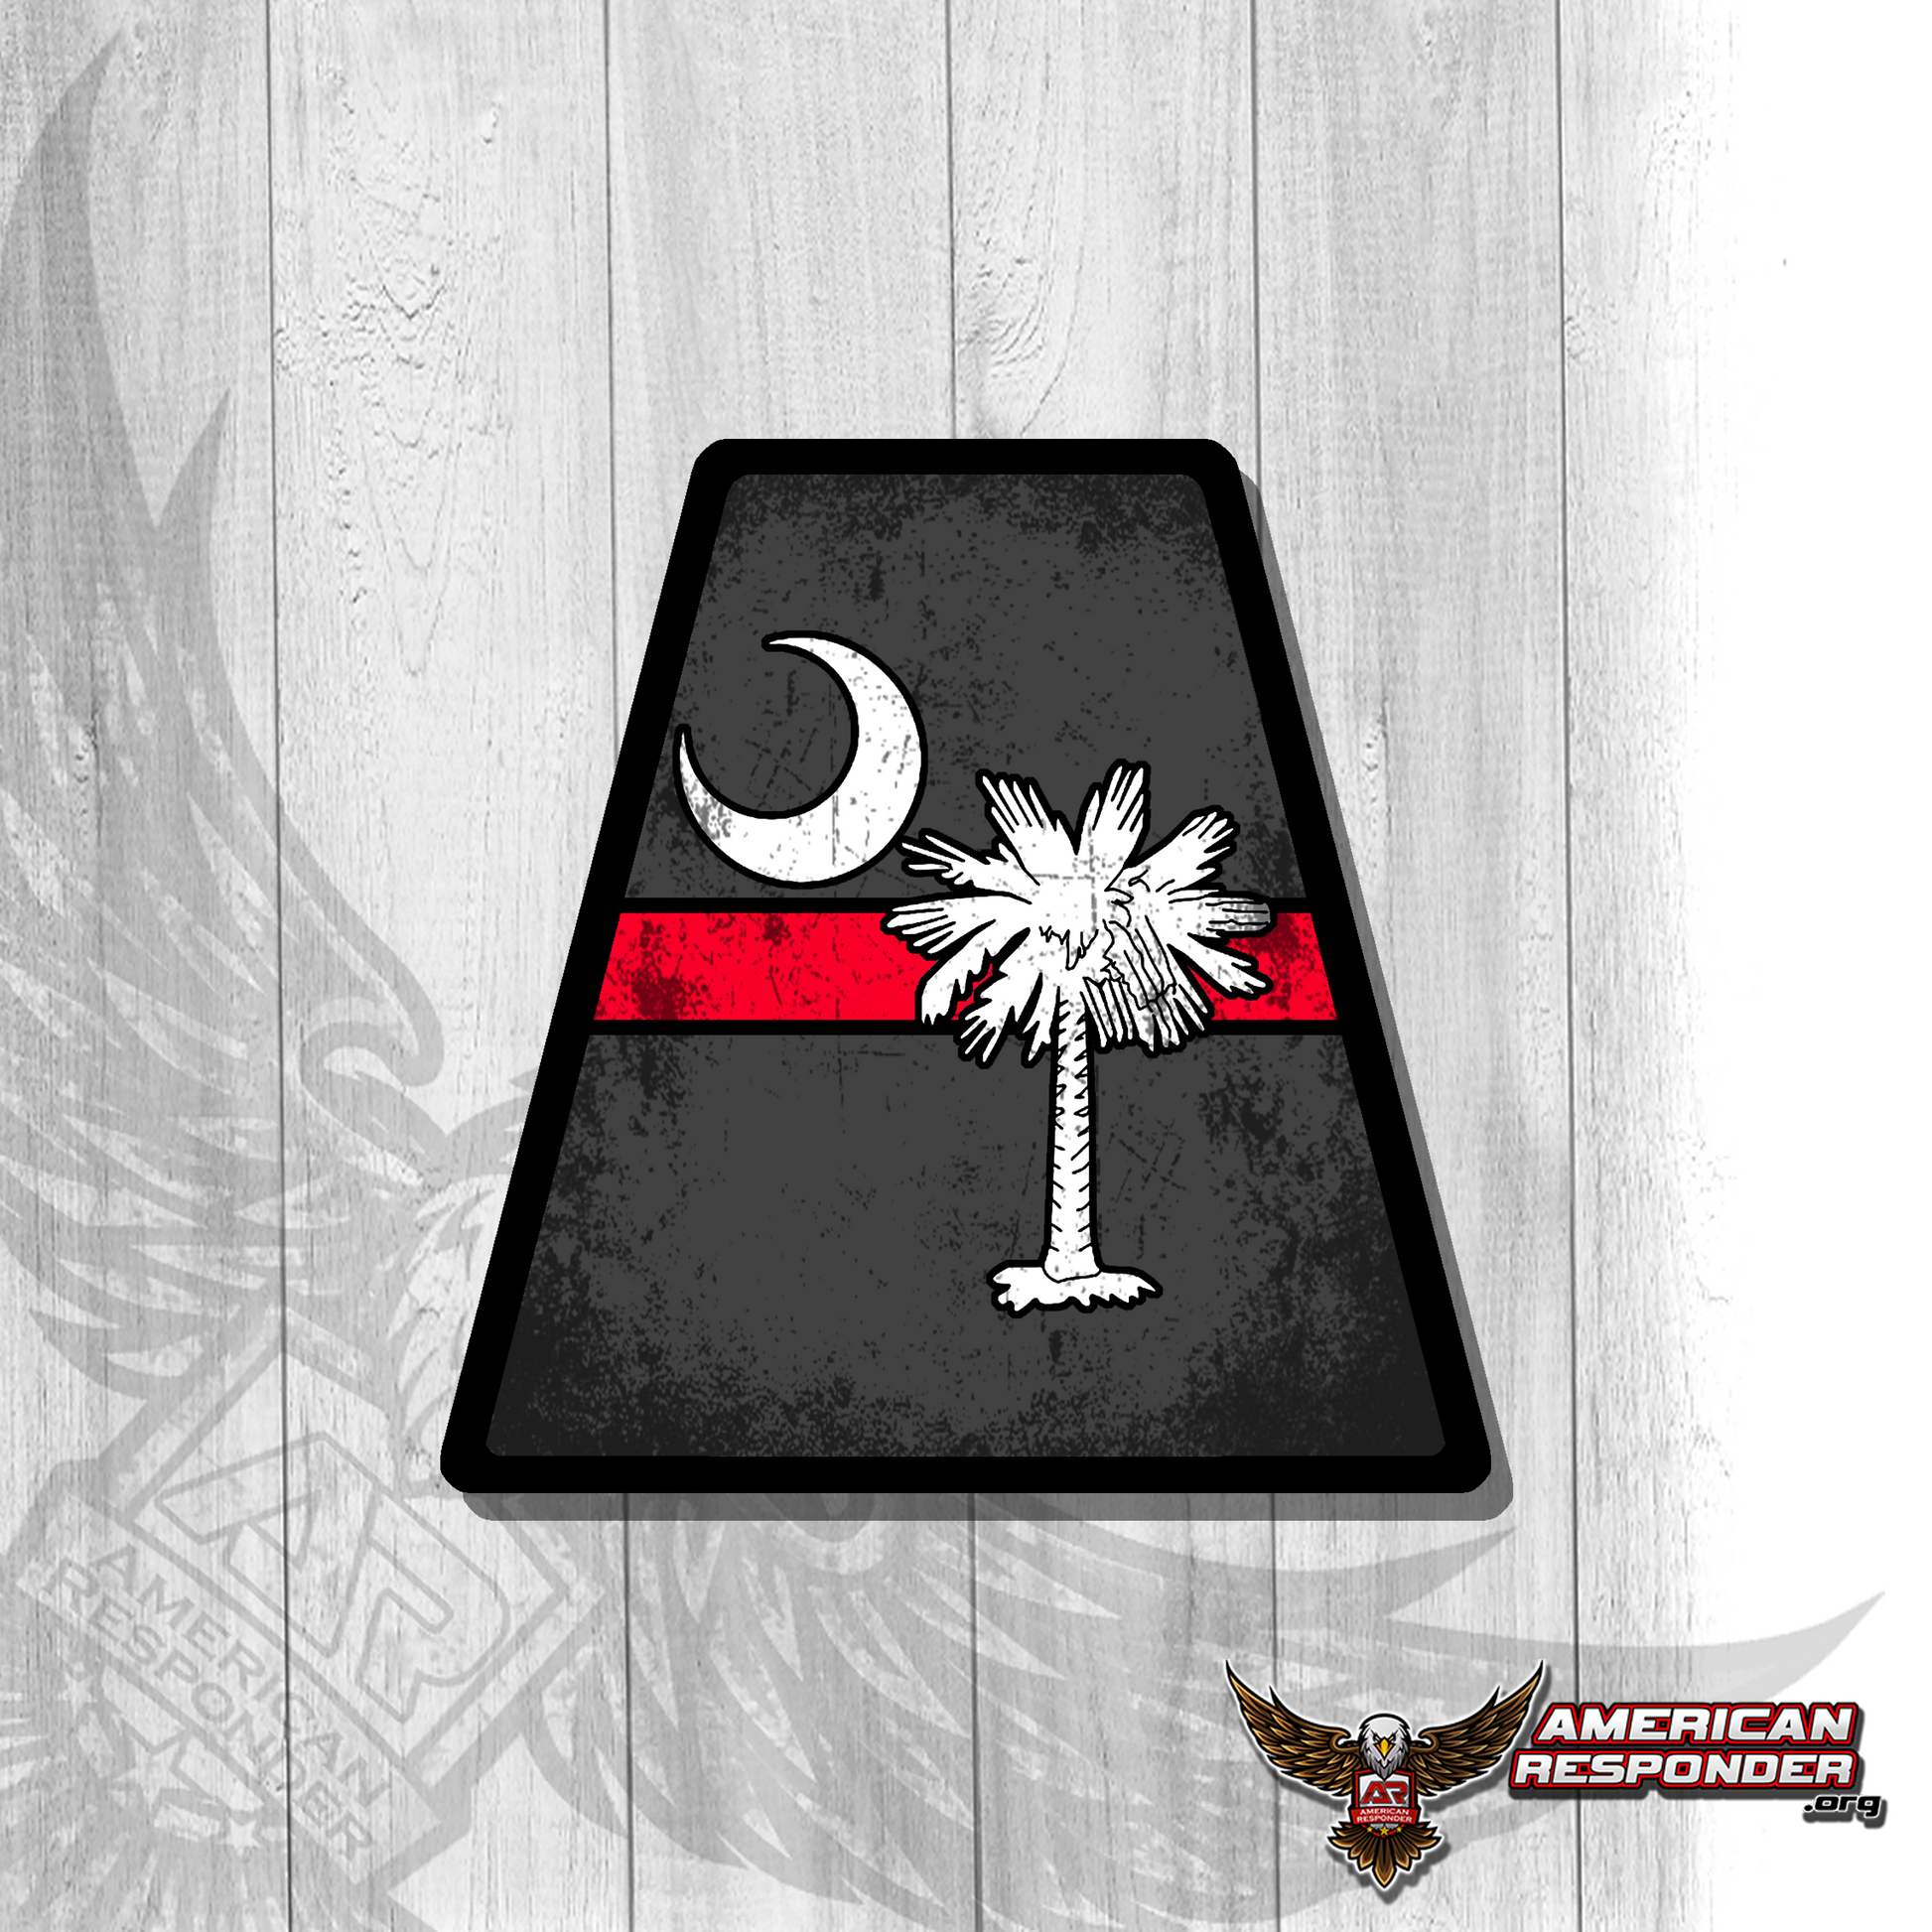 South Carolina Subdued Tets Decals - American Responder Designs